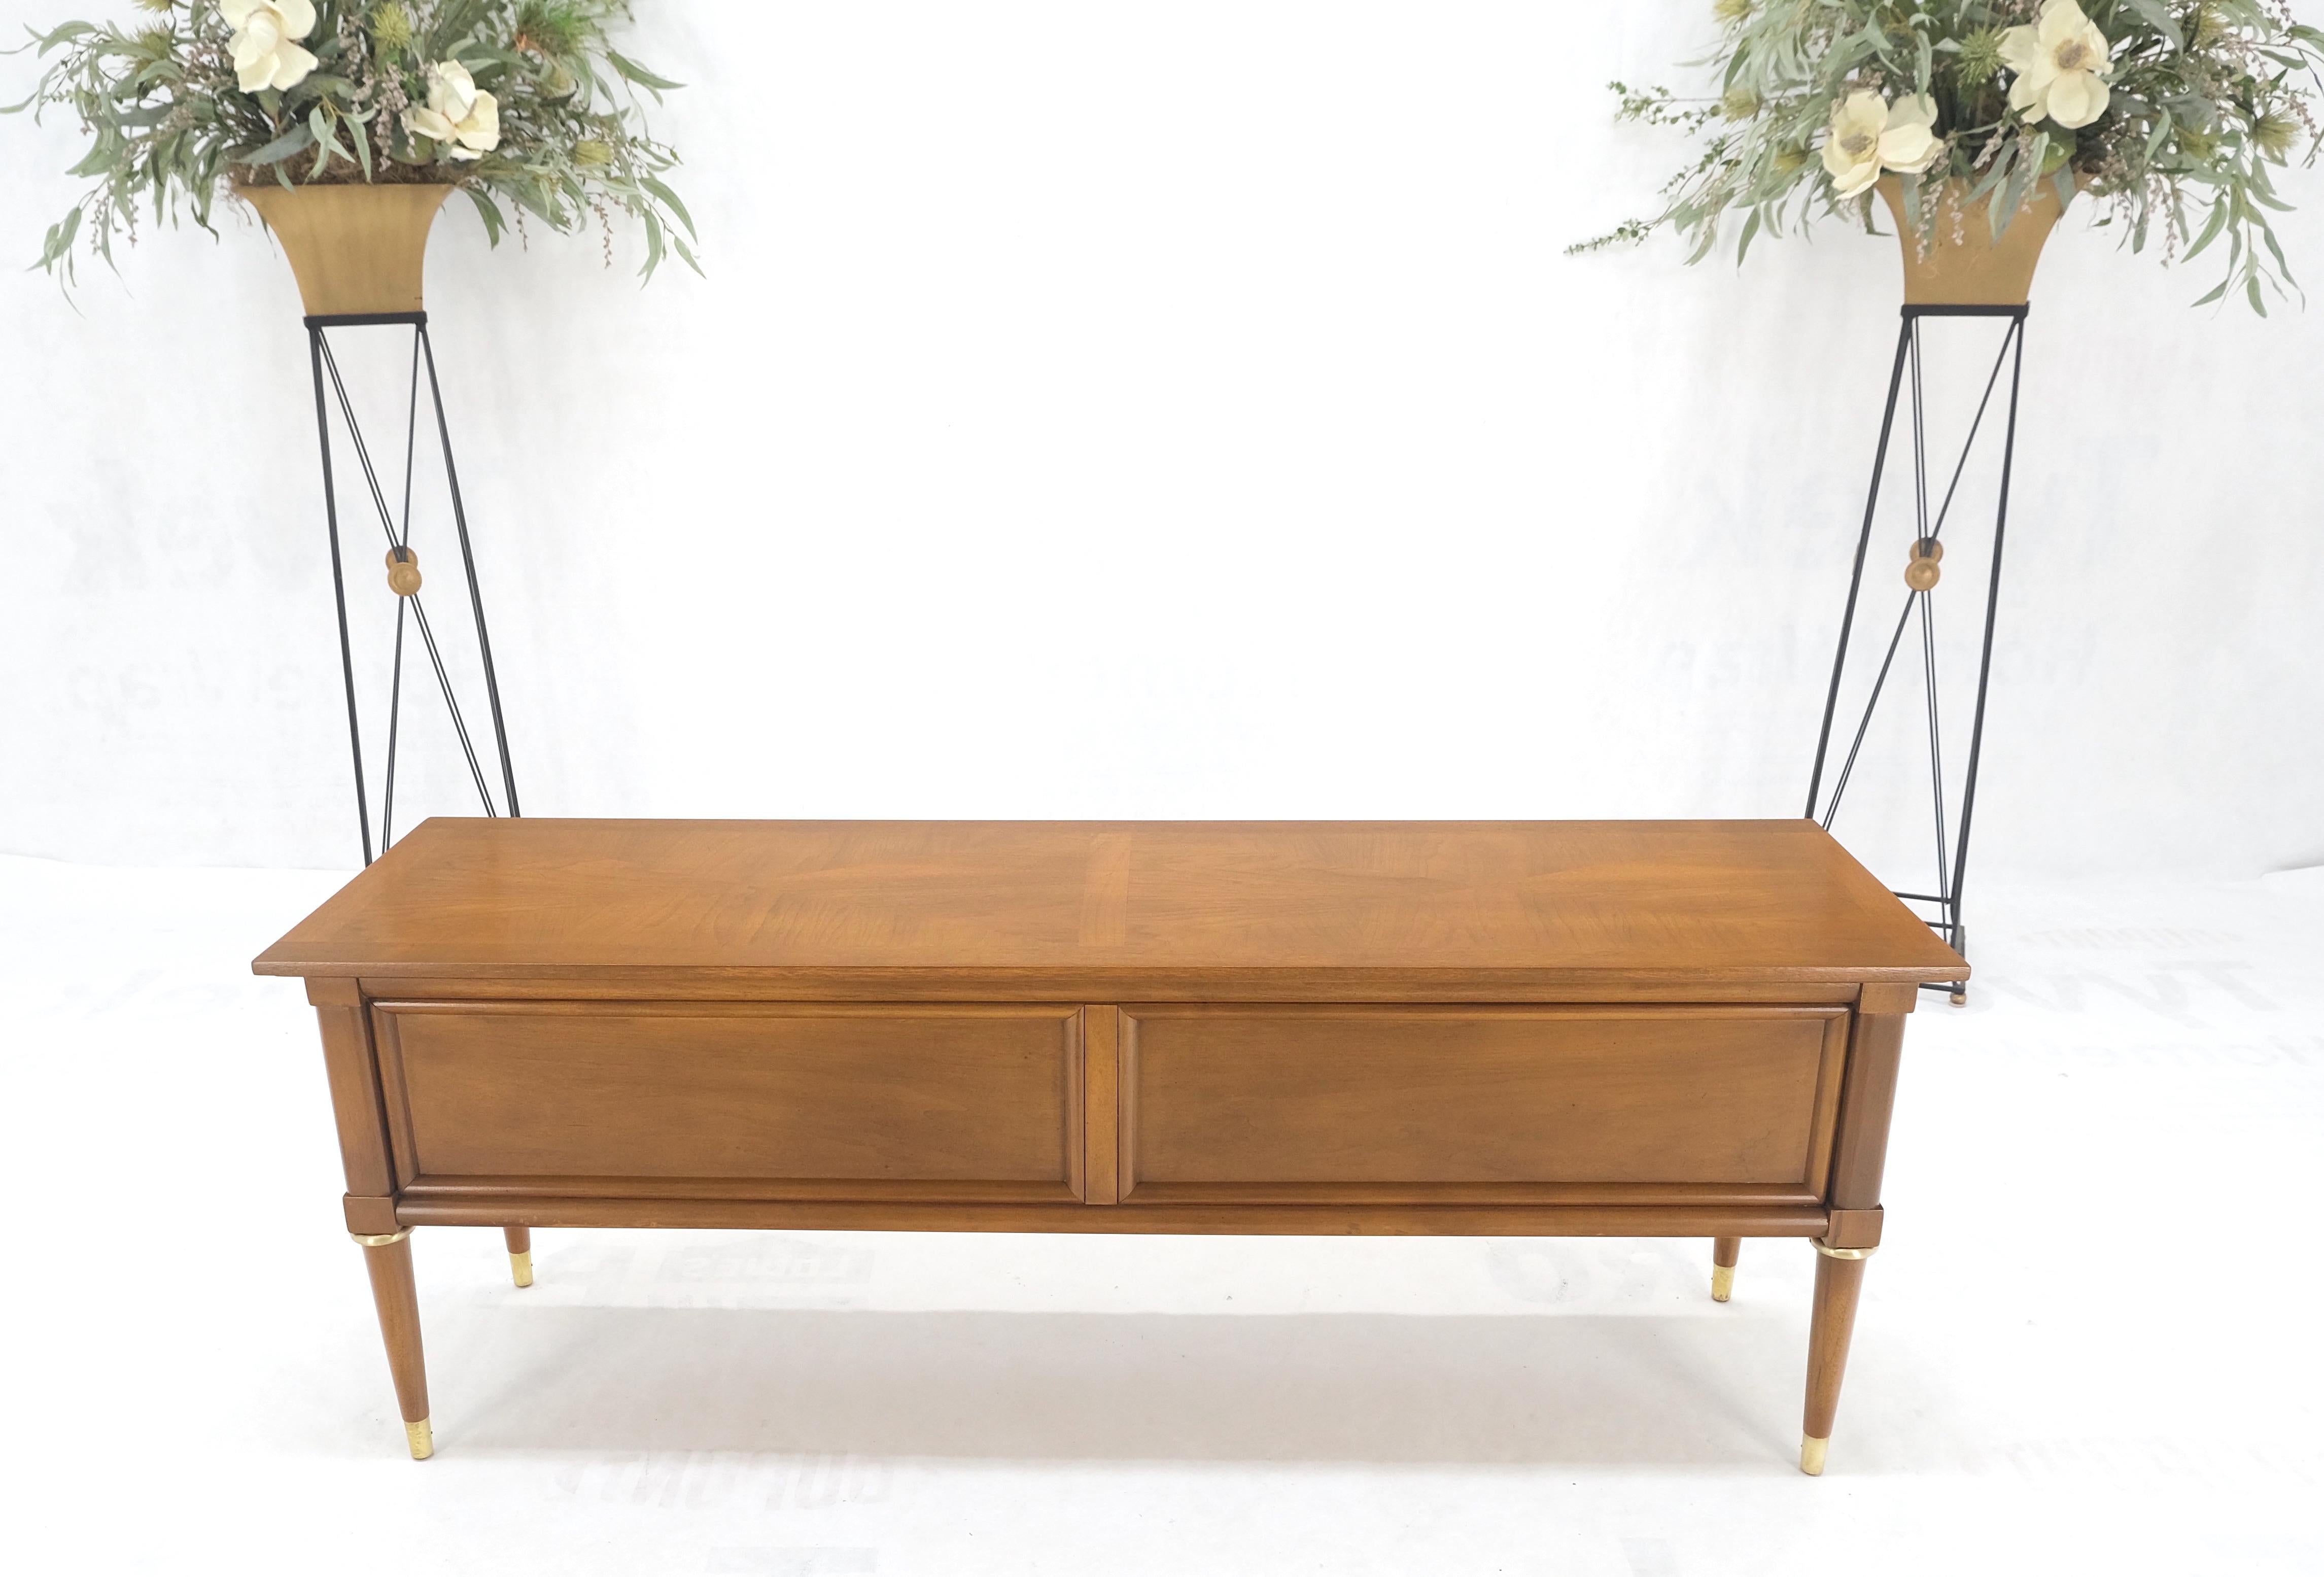 Brass Drop Rings Pulls Low Profile Tapered Legs Long Credenza Mid Century MINT! For Sale 1